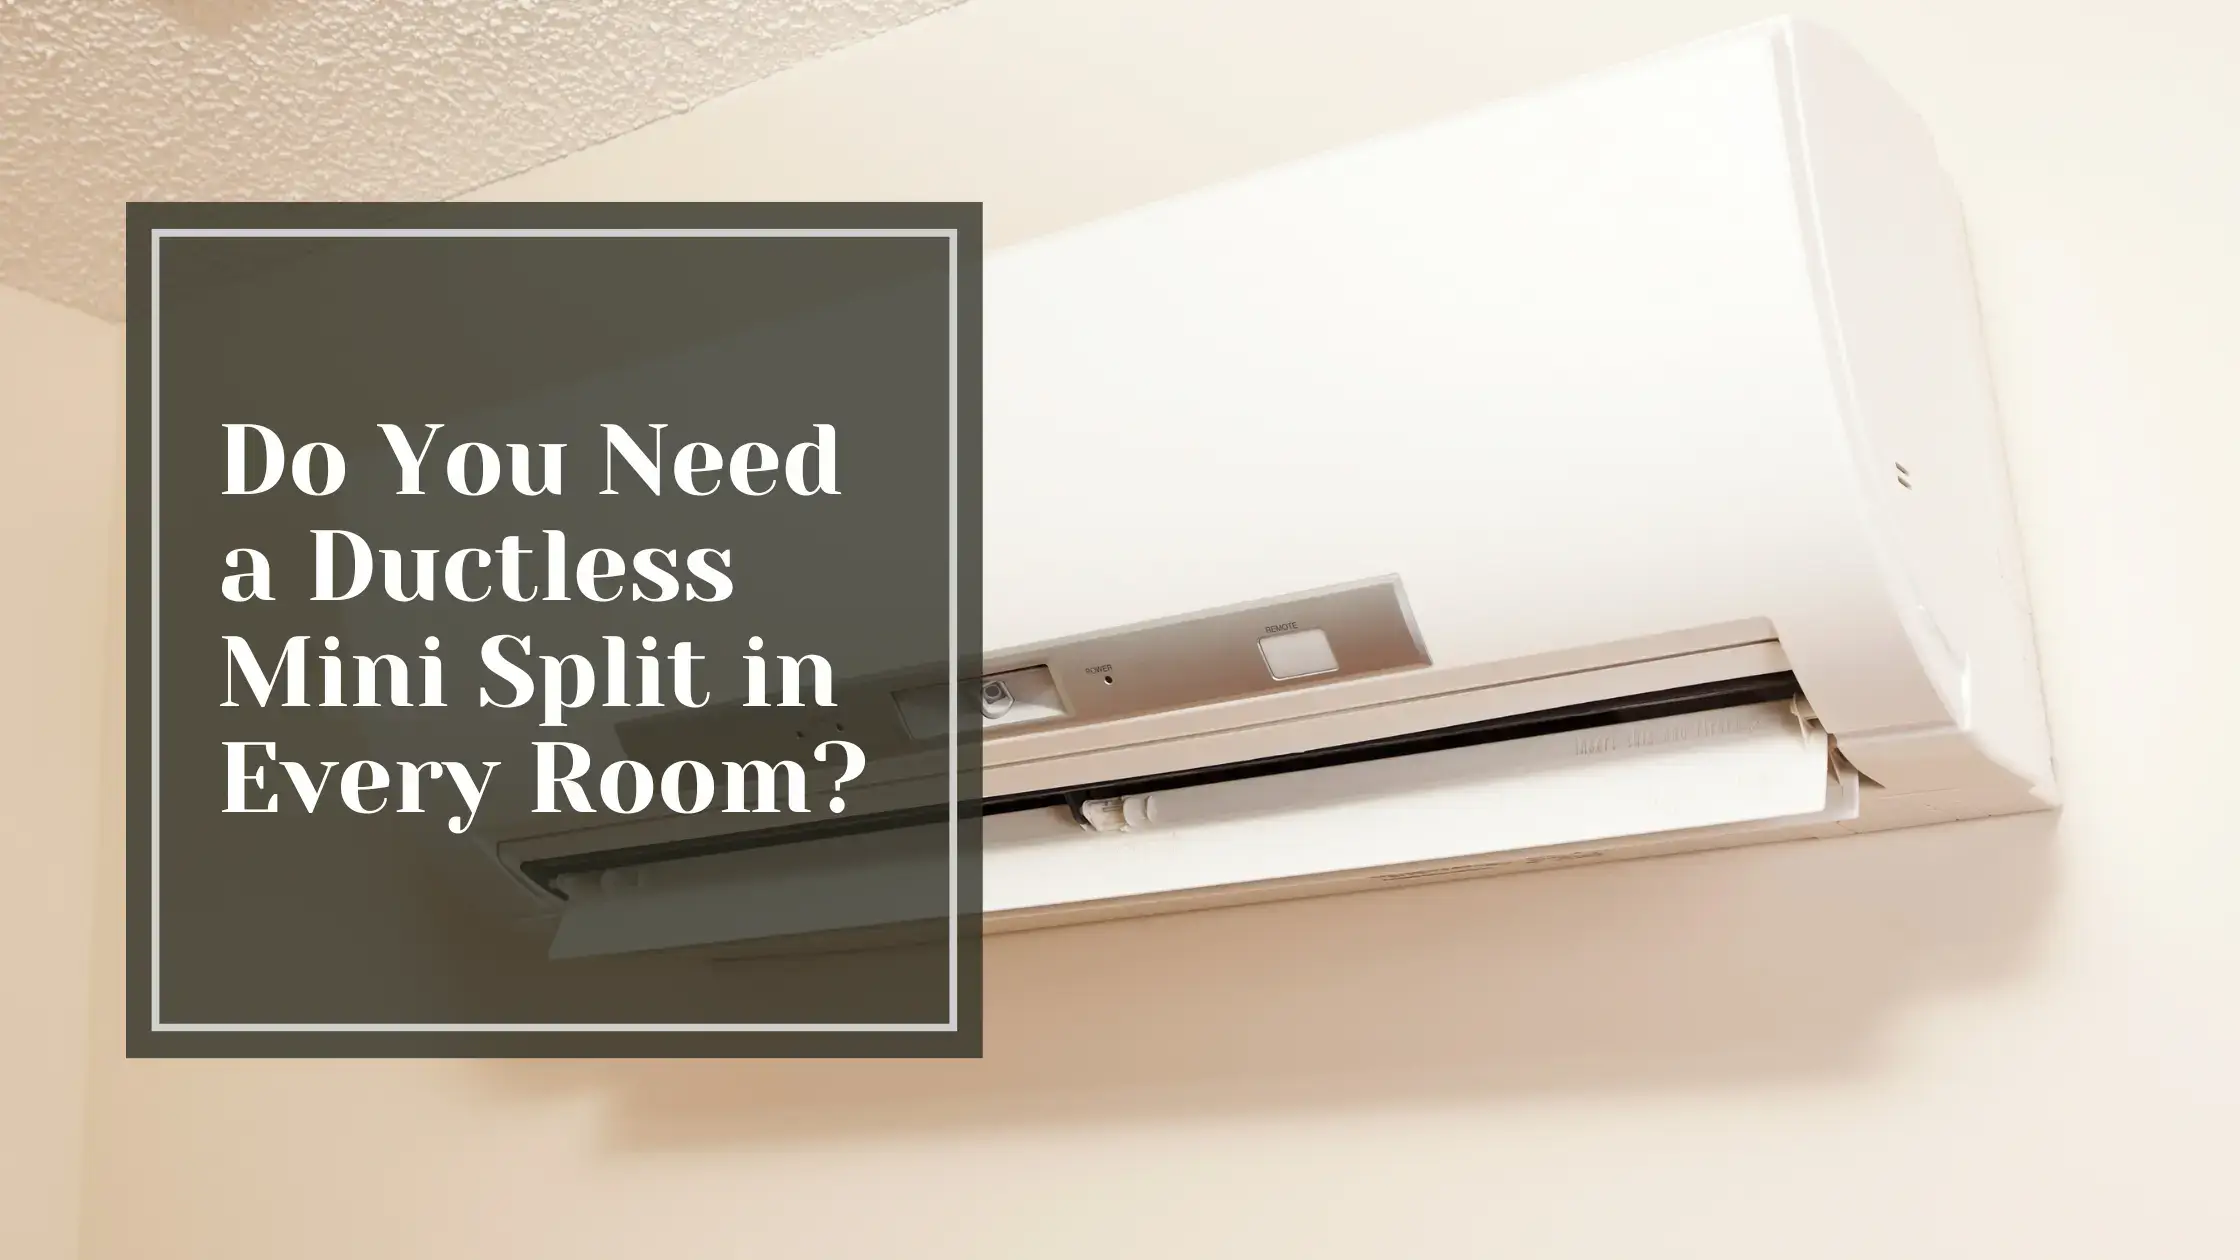 Do You Need a Ductless Mini Split in Every Room?